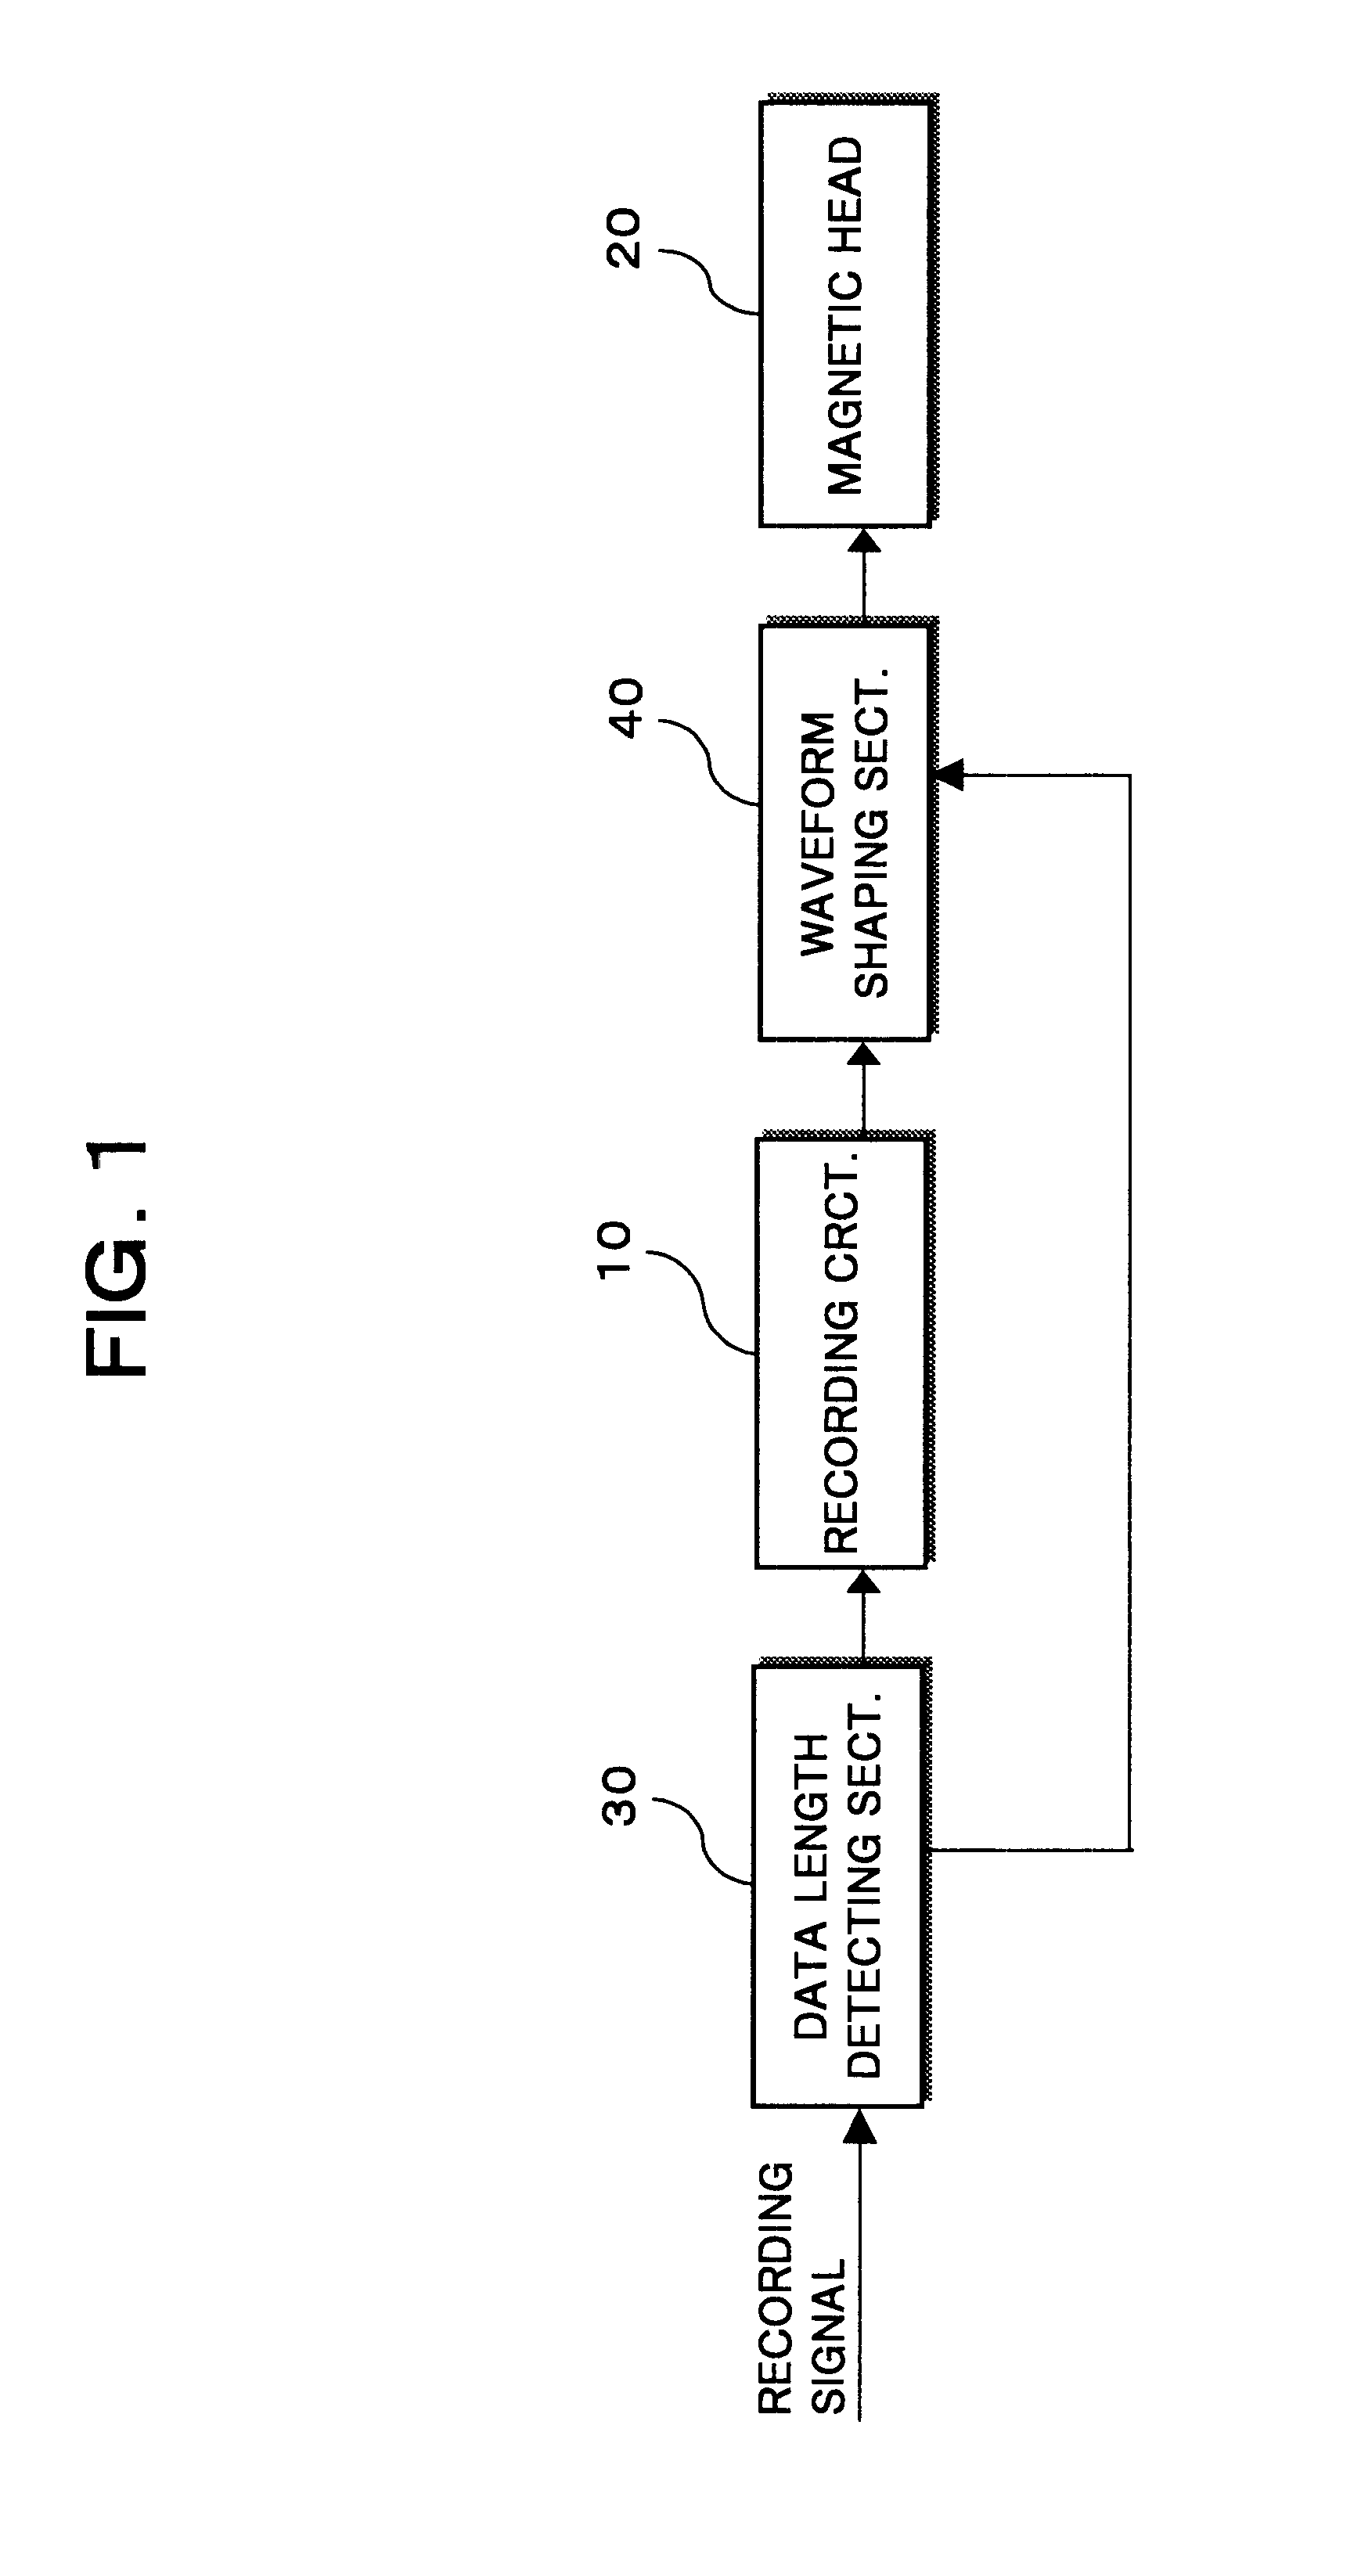 Magnetic recording apparatus and integrated circuit for magnetic recording with a shaped waveform